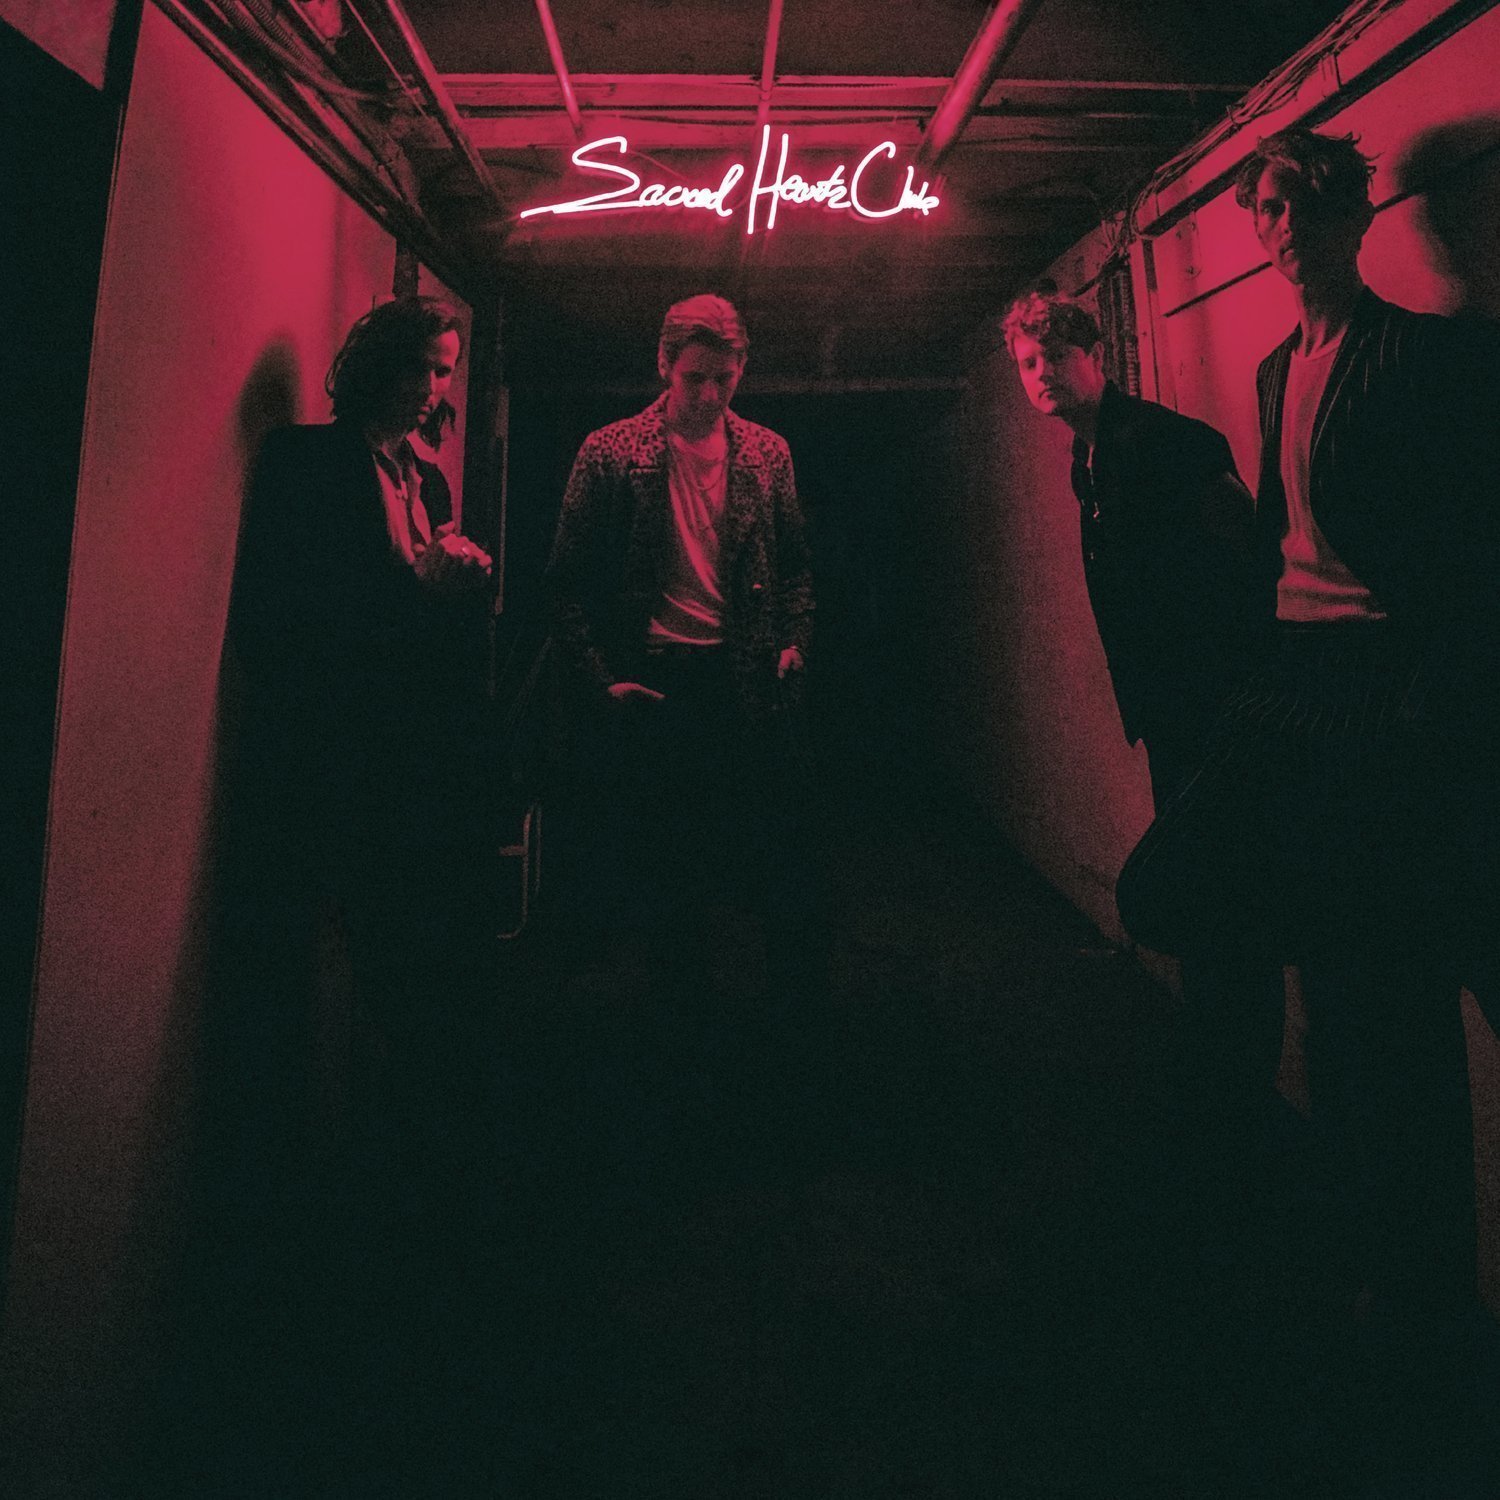 Vinyl Record Foster The People Sacred Hearts Club (LP)